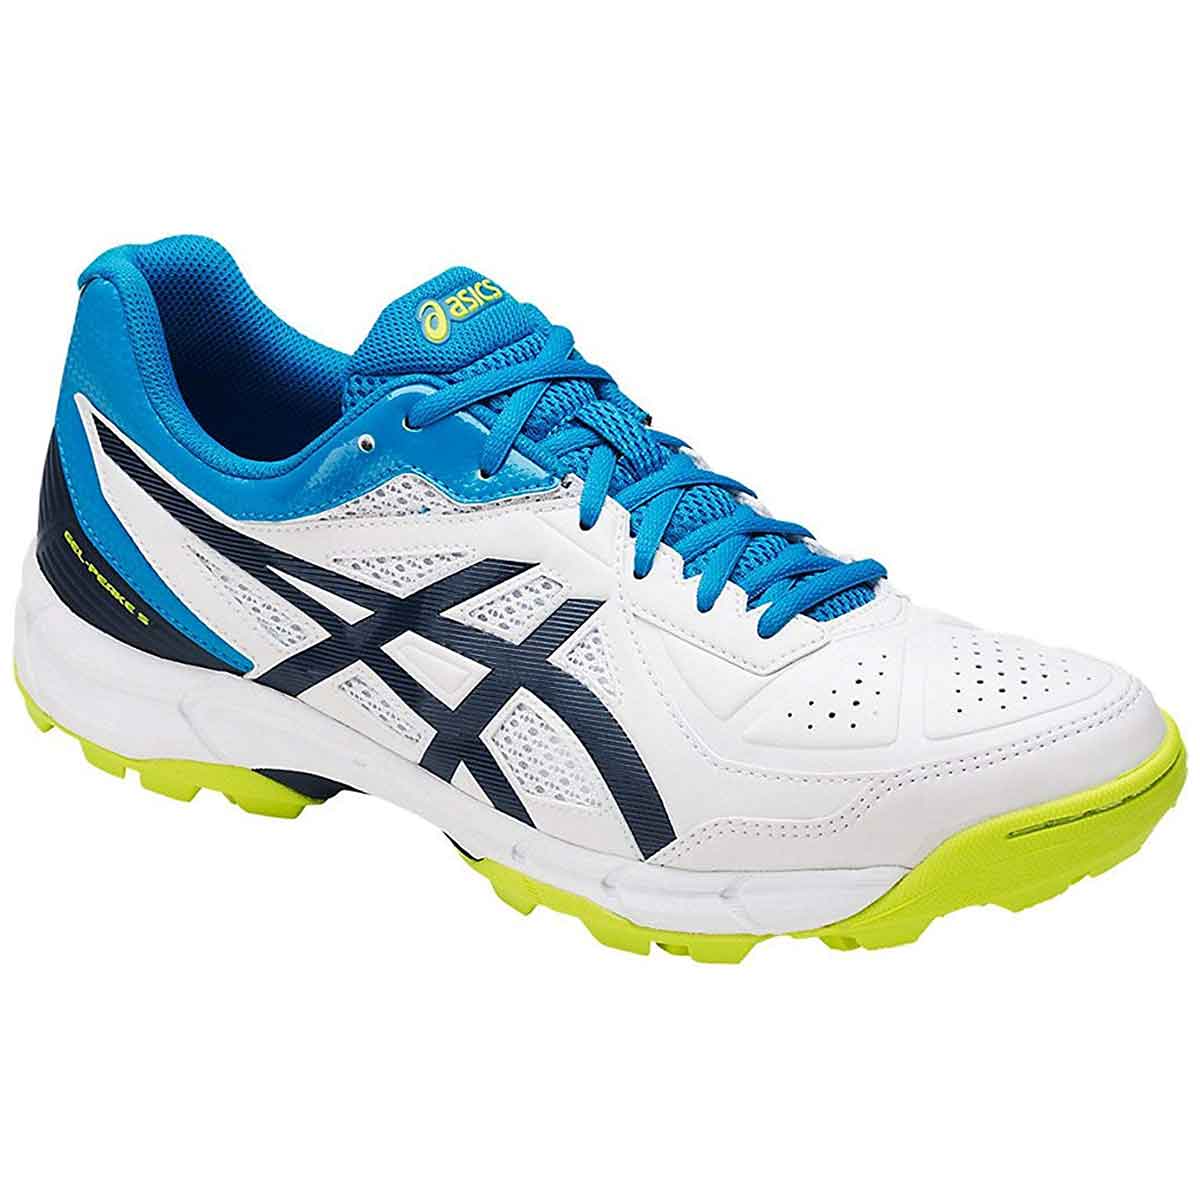 asics cricket trainers, OFF 70%,welcome 